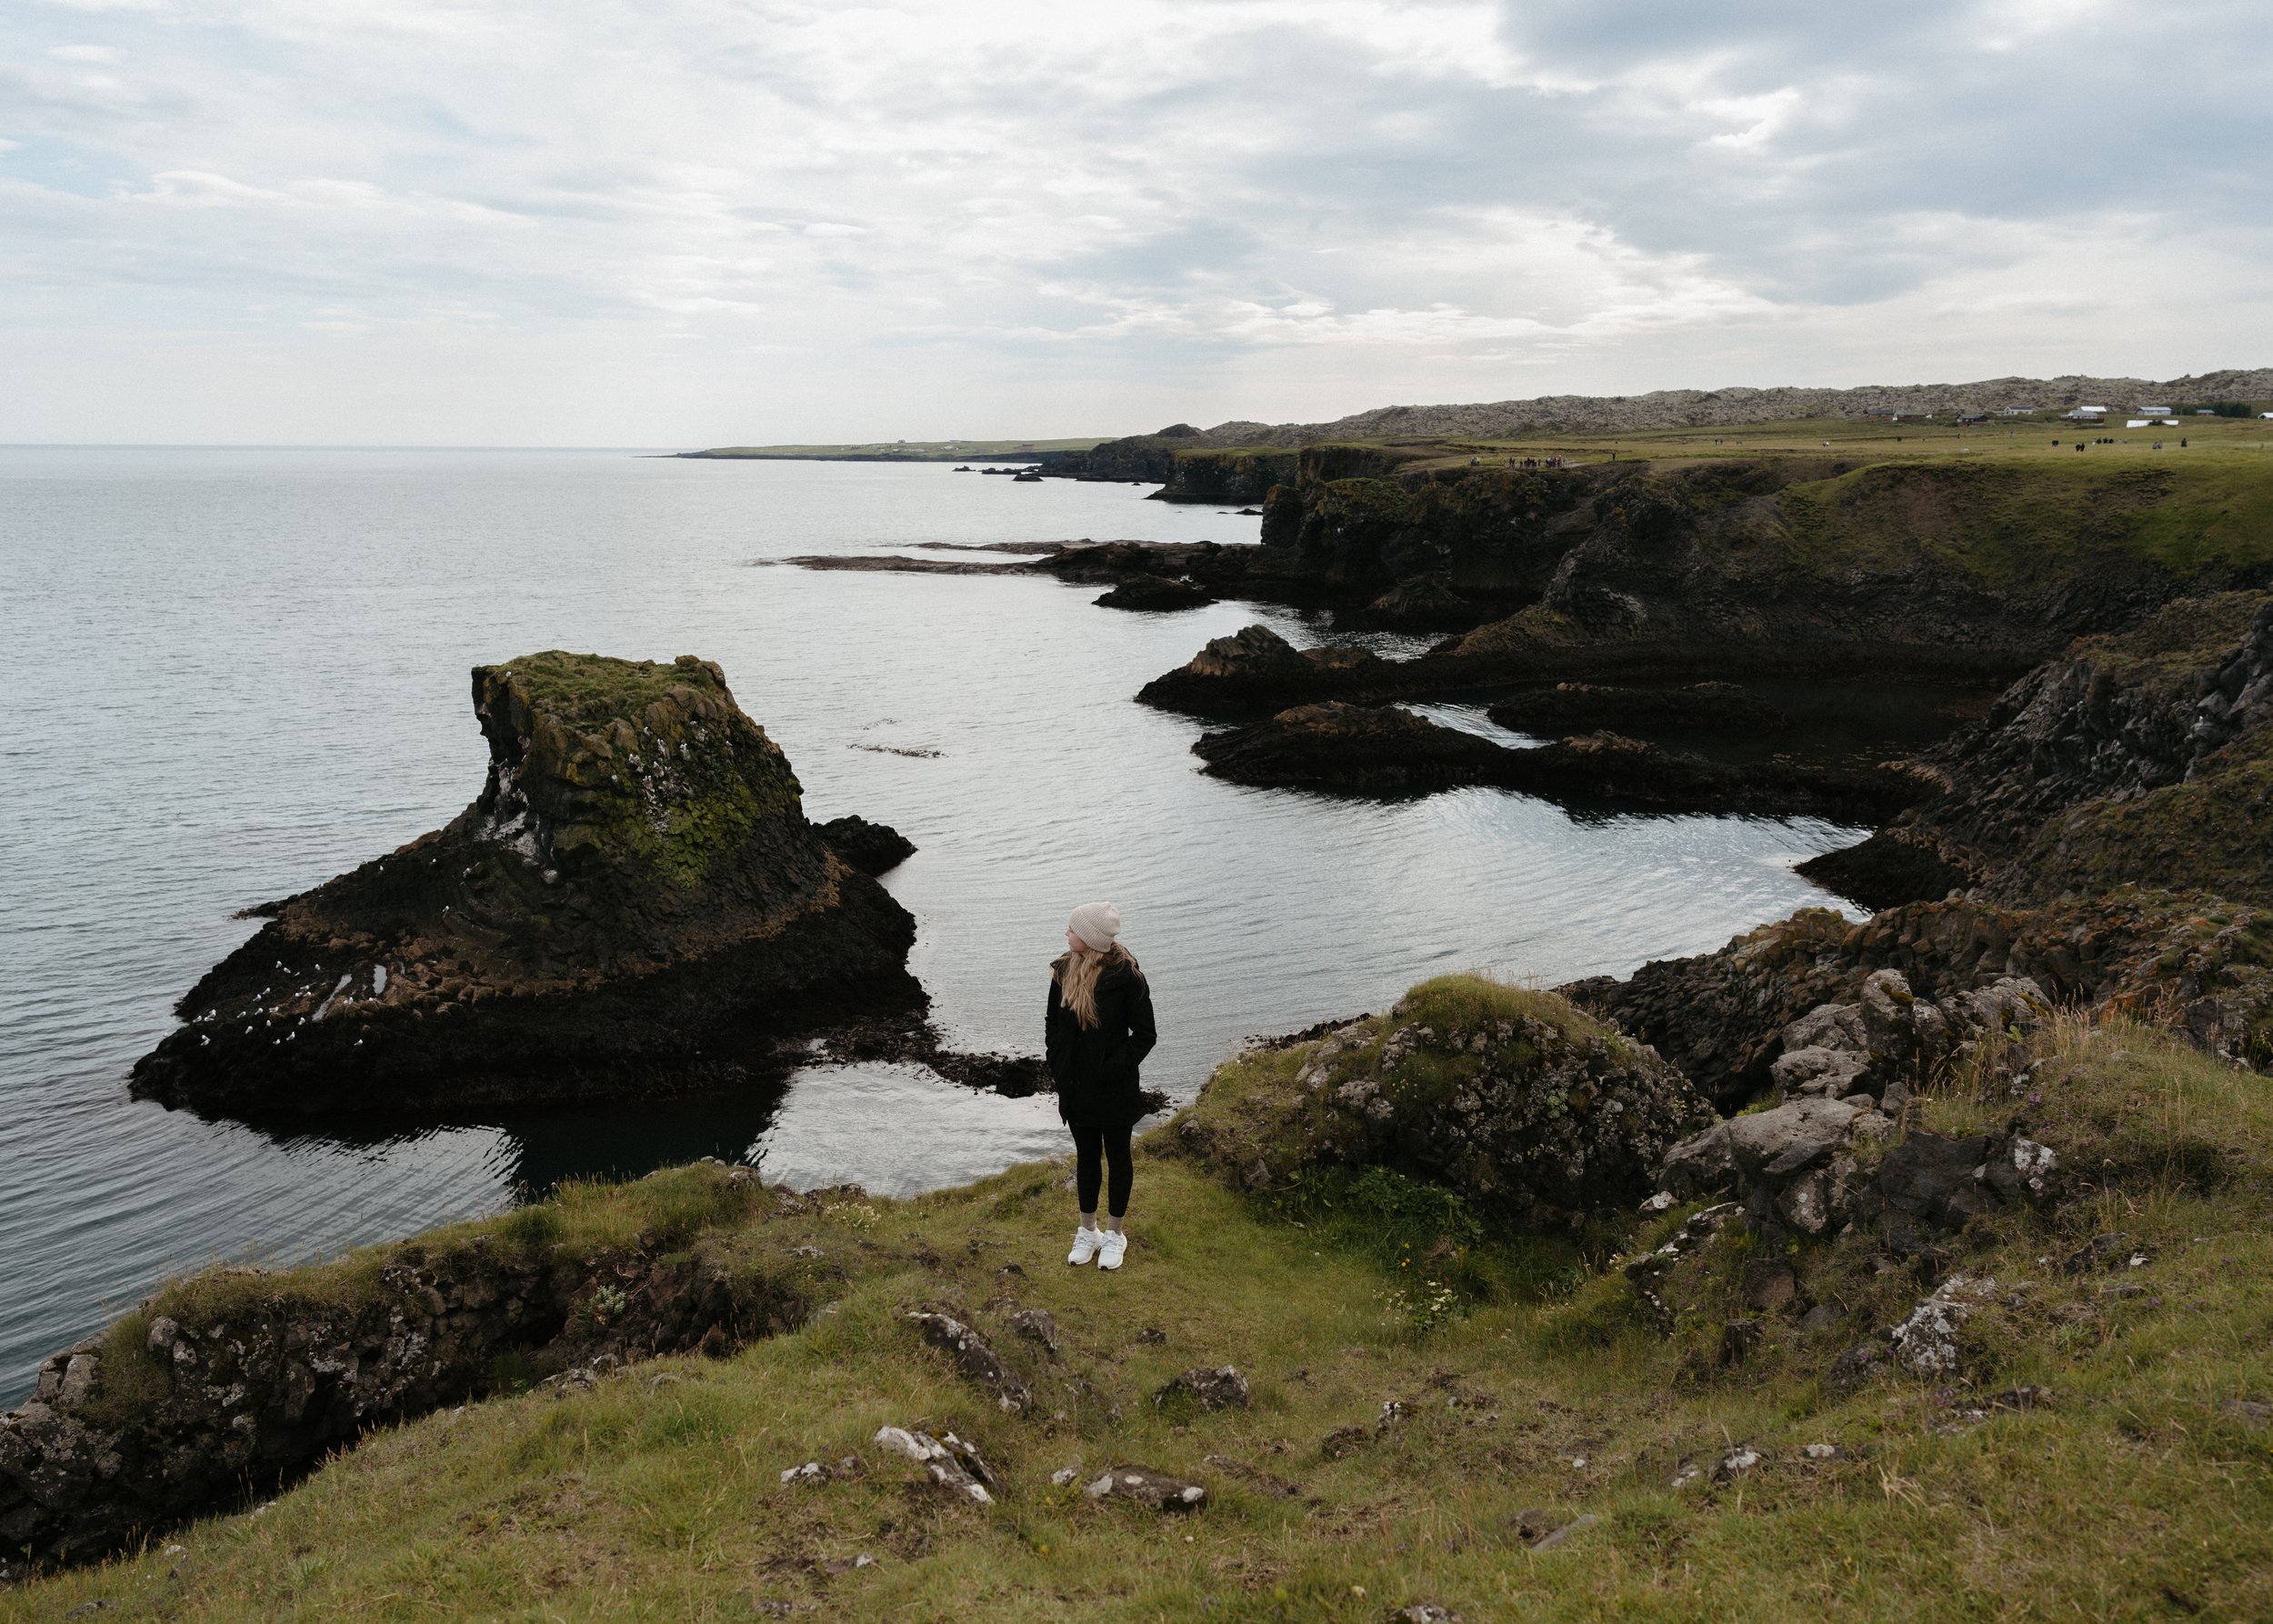 A week in Iceland - travel itinerary and guide by an Iceland elopement photographer - Snæfellsnes Peninsula / Arnarstapi Cliffs